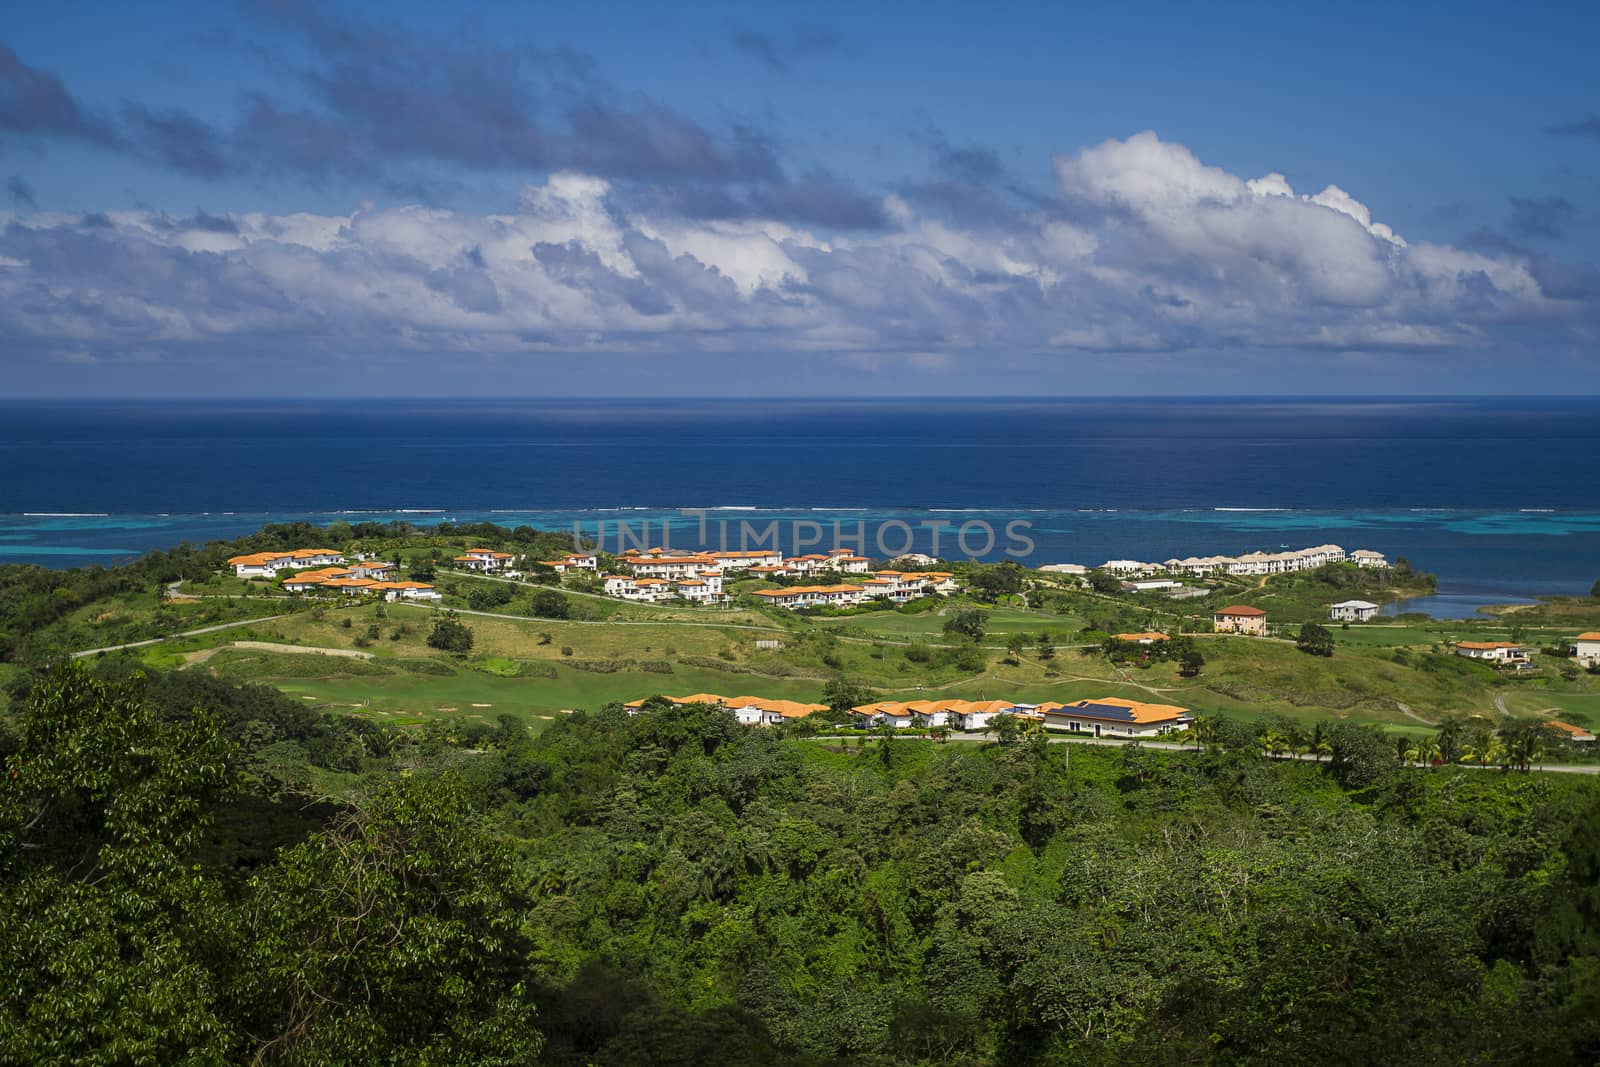 Large private rich village on the island of Roatan